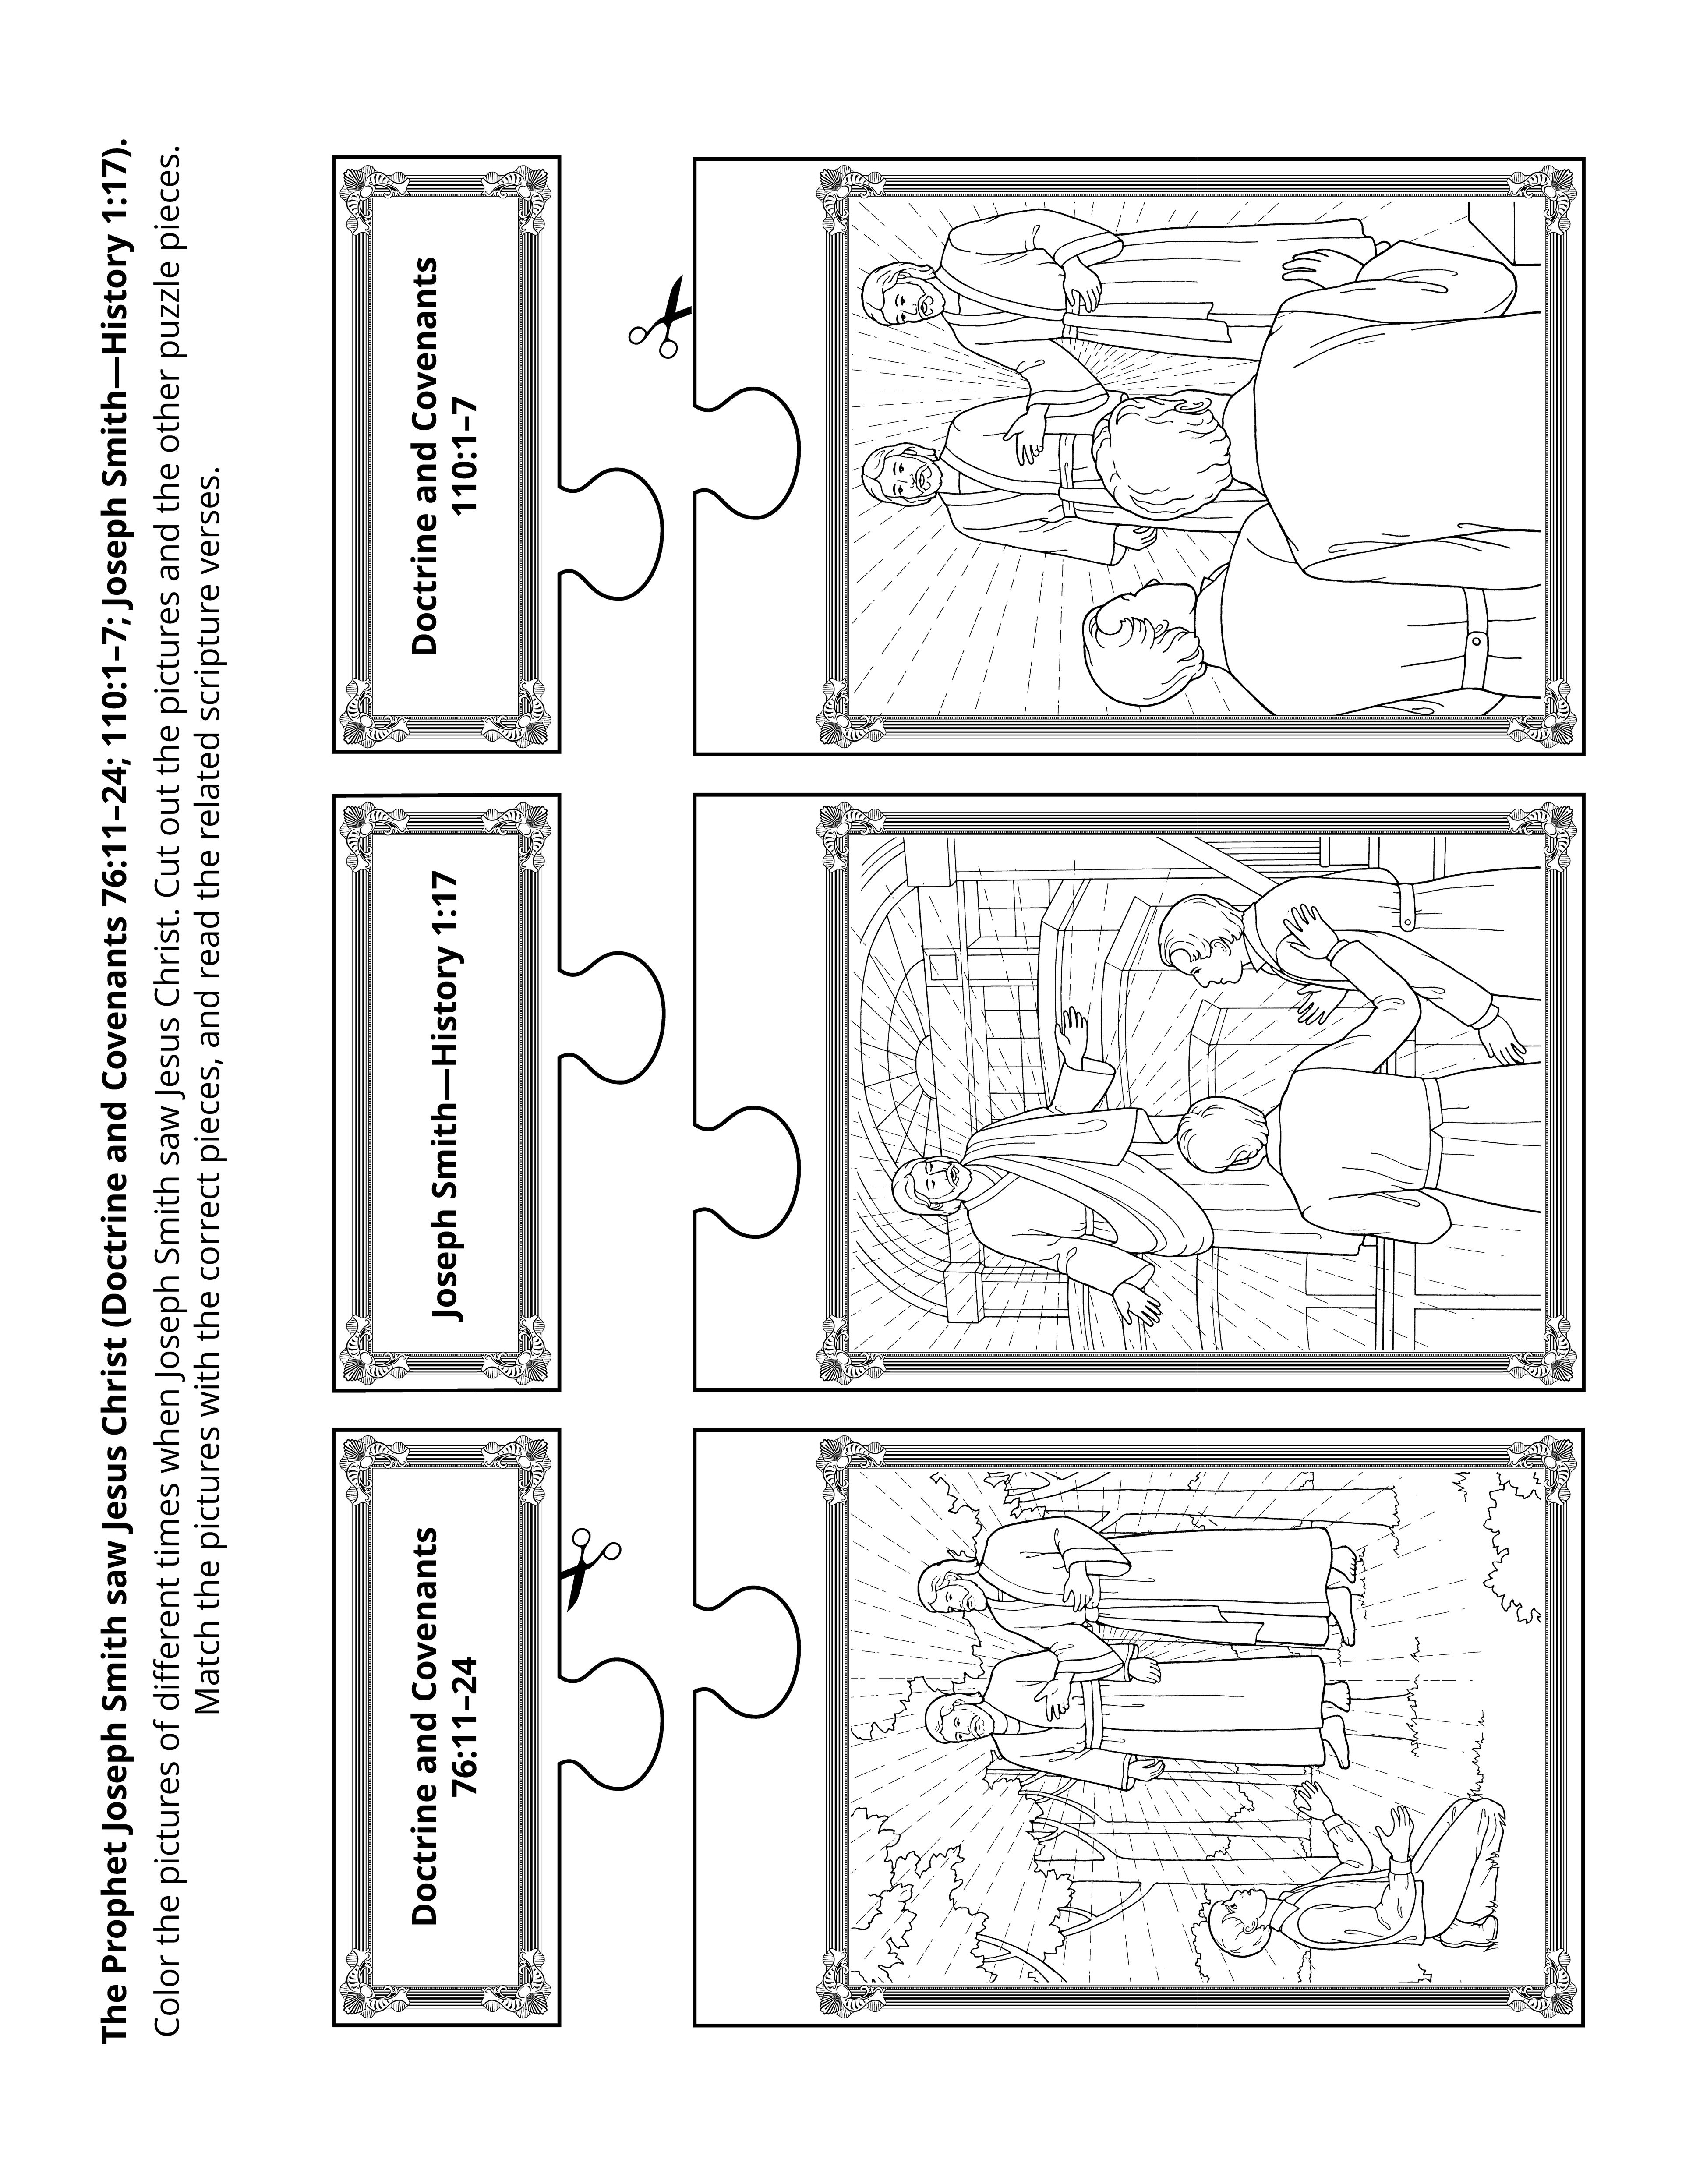 Line art illustration of key events in life of Joseph Smith.